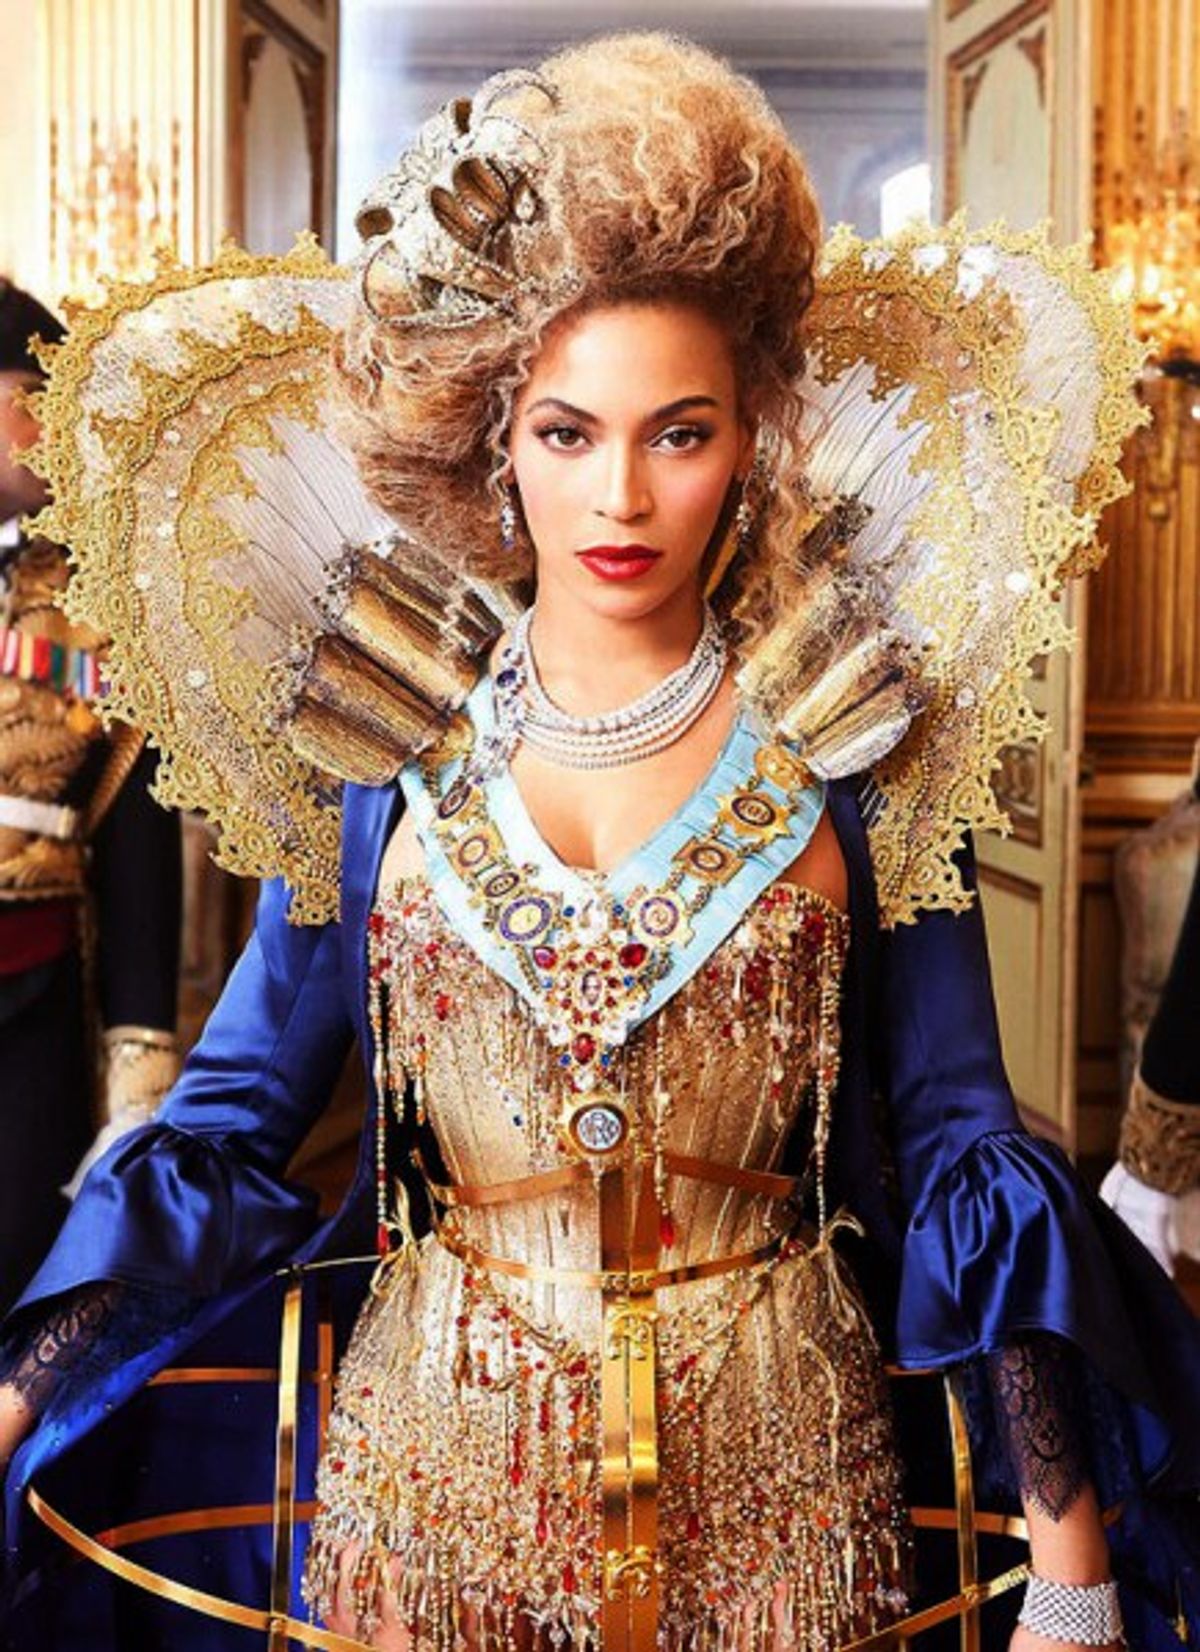 7 Reasons Why we Shouldn't Hate Beyonce